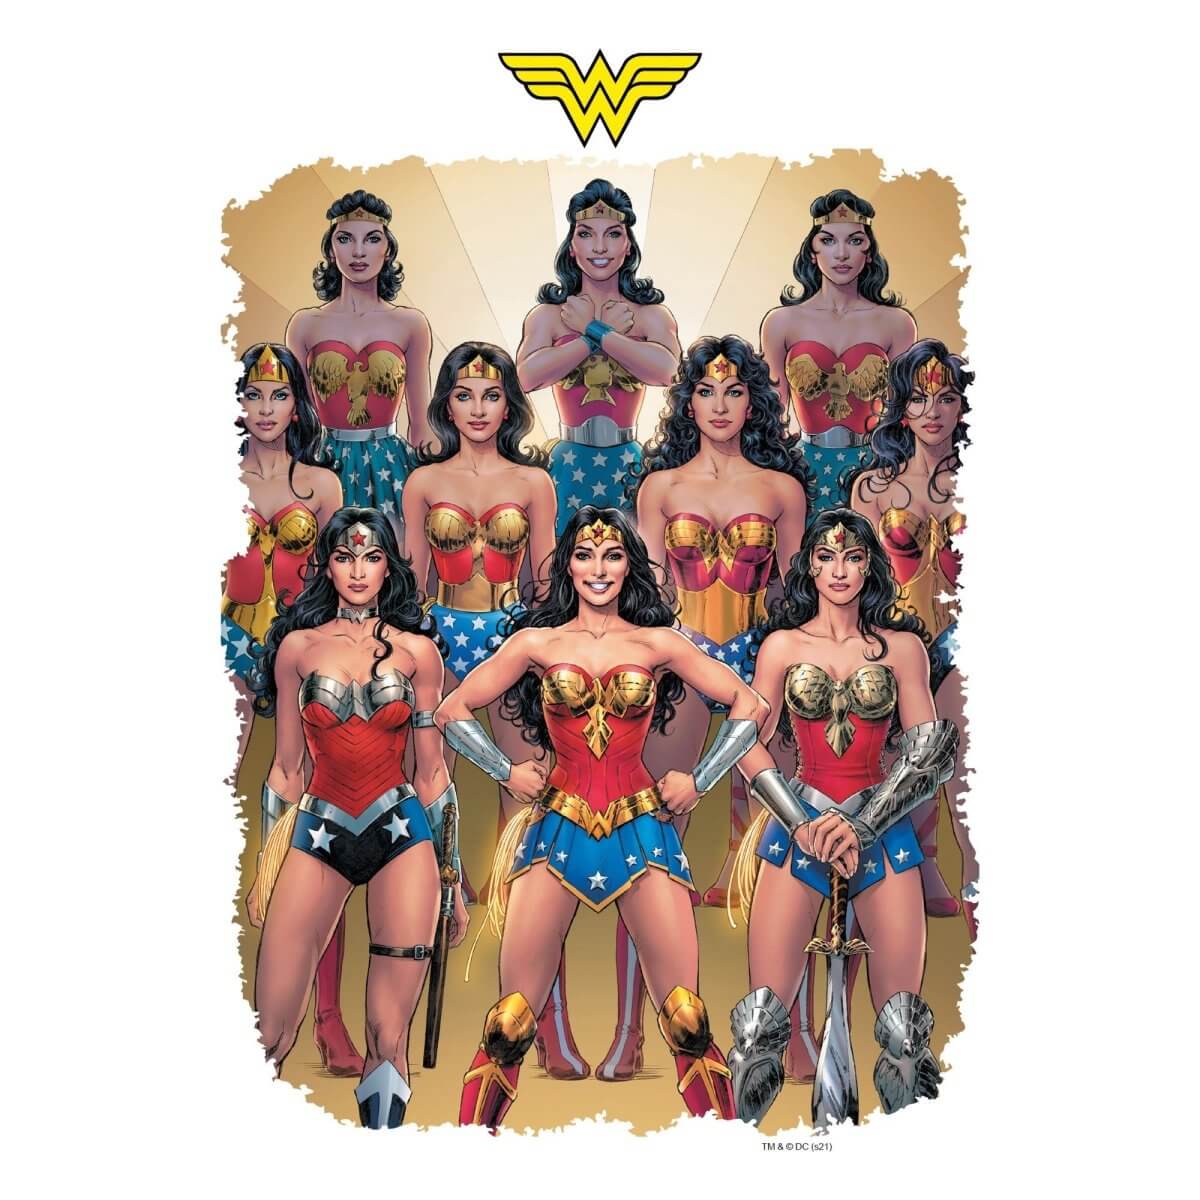 Kismet Decals Wonder Woman #750 Var. Comic Cover Series Officially Licensed Wall Sticker - Easy DIY DC Comics Home, Kids or Adult Bedroom, Office, Living Room Decor Wall Art - Kismet Decals